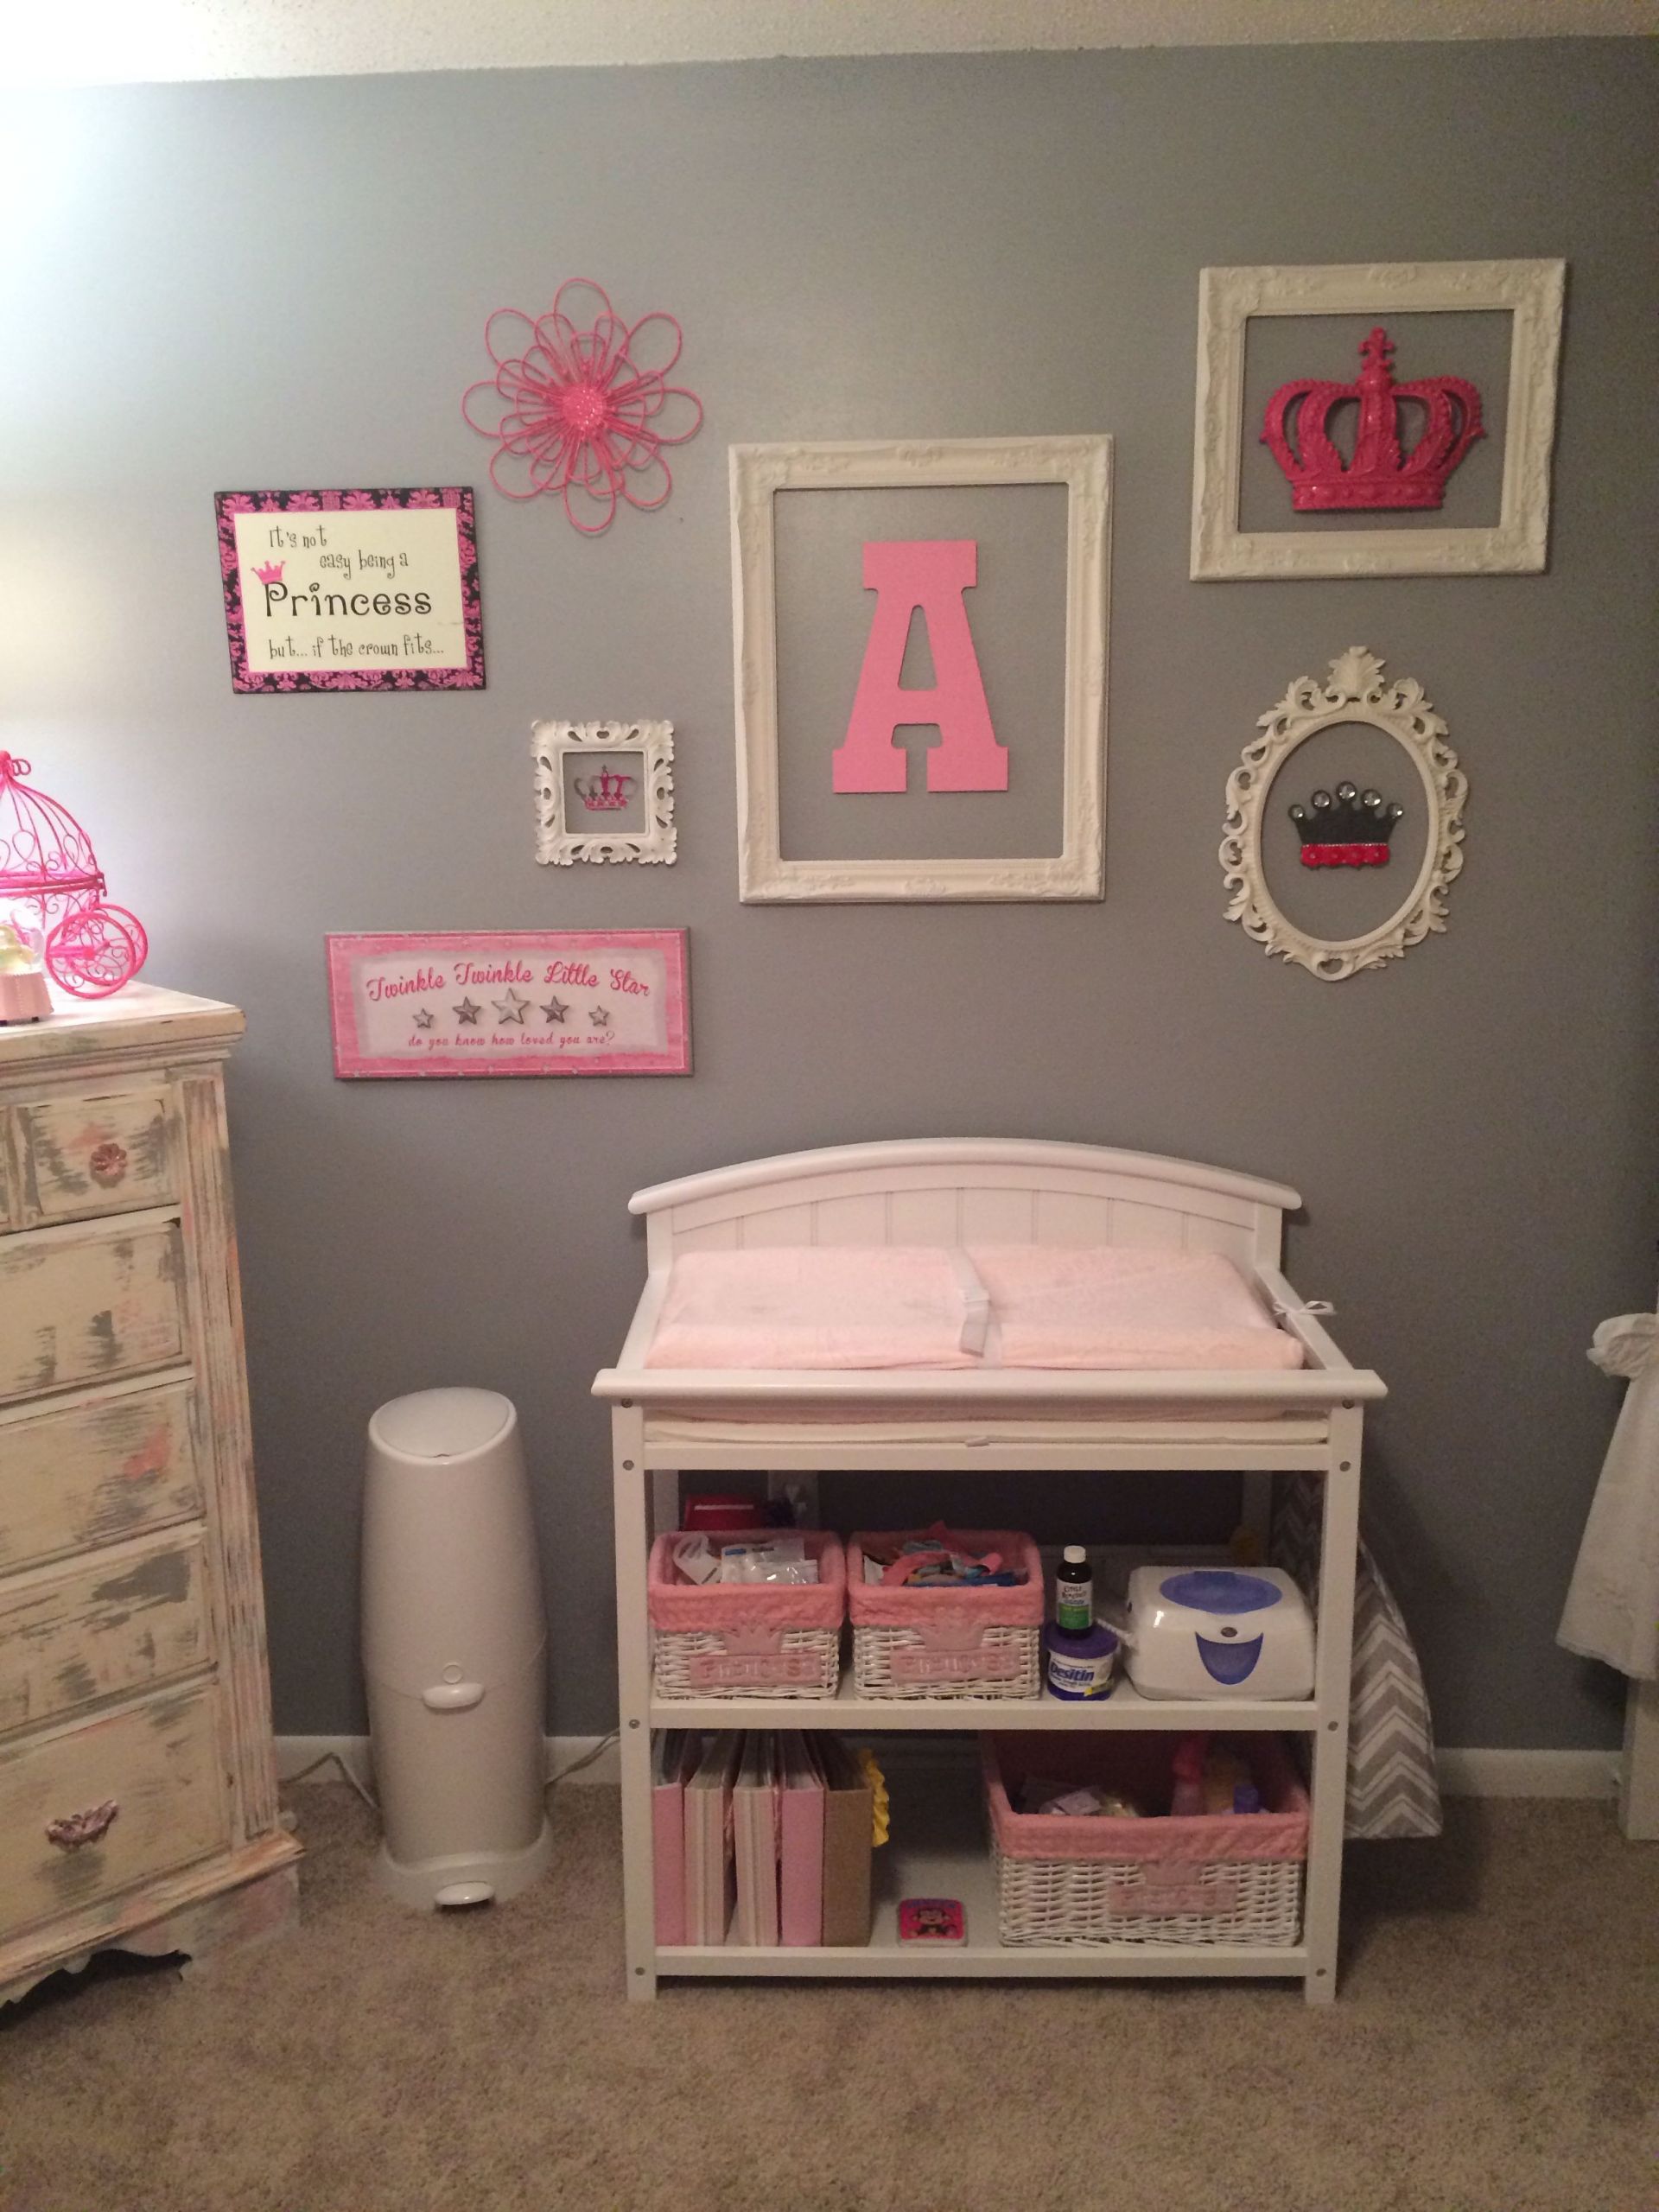 DIY Baby Girl Room Decor
 Inexpensive and Easy To Do DIY Wall Décor With images